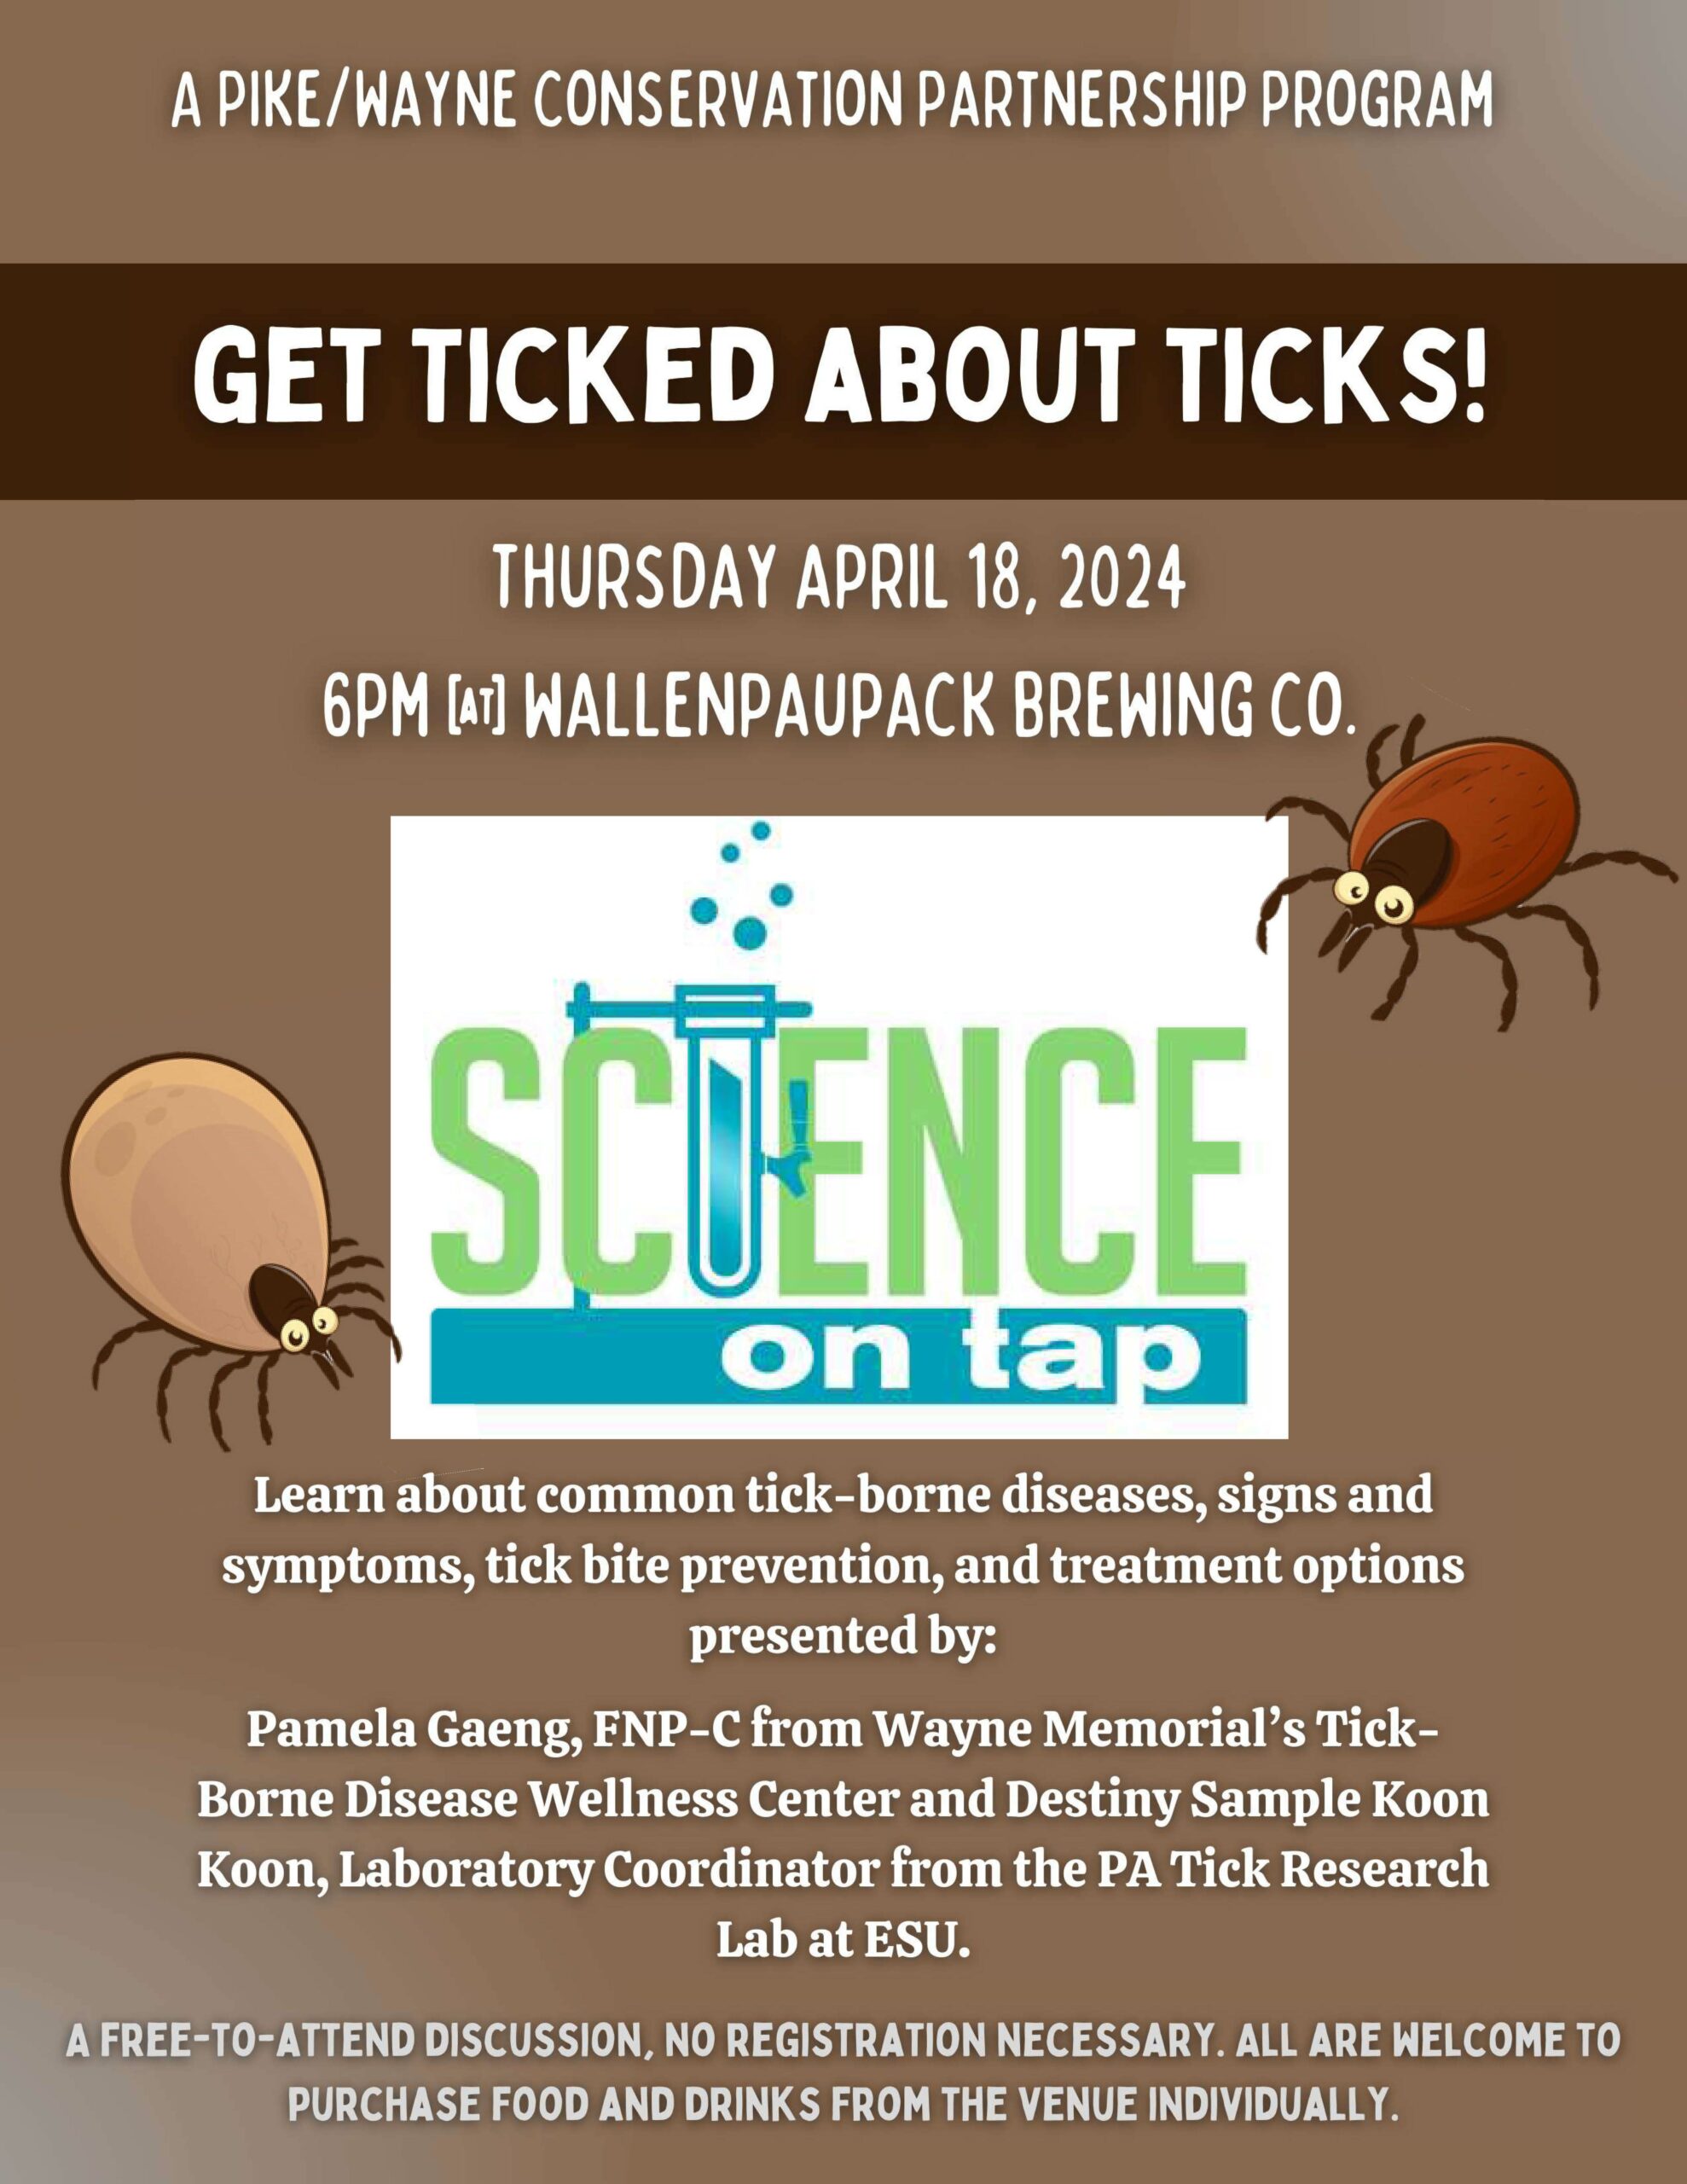 Flyer for Science on Tap: Get Ticket about Ticks! Text reads "A Pike Wayne Conservation Partnership Program, Thursday April 18, 2024, 6pm at Wallenpaupack Brewing Company. Learn about common tick-borne diseases, signs and symptoms, tick bite prevention, and treat options presented by Pamela Gaeng, FNP-C from Wayne Memorial's Tick-Borne Disease Wellness Center and Destiny Sample Koon Koon, Laboratory Coordinator from the PA Tick Research Lab at ESU. A free to attend discussion, no registration necessary. All are welcome to purchase food and drinks from the venue individually.